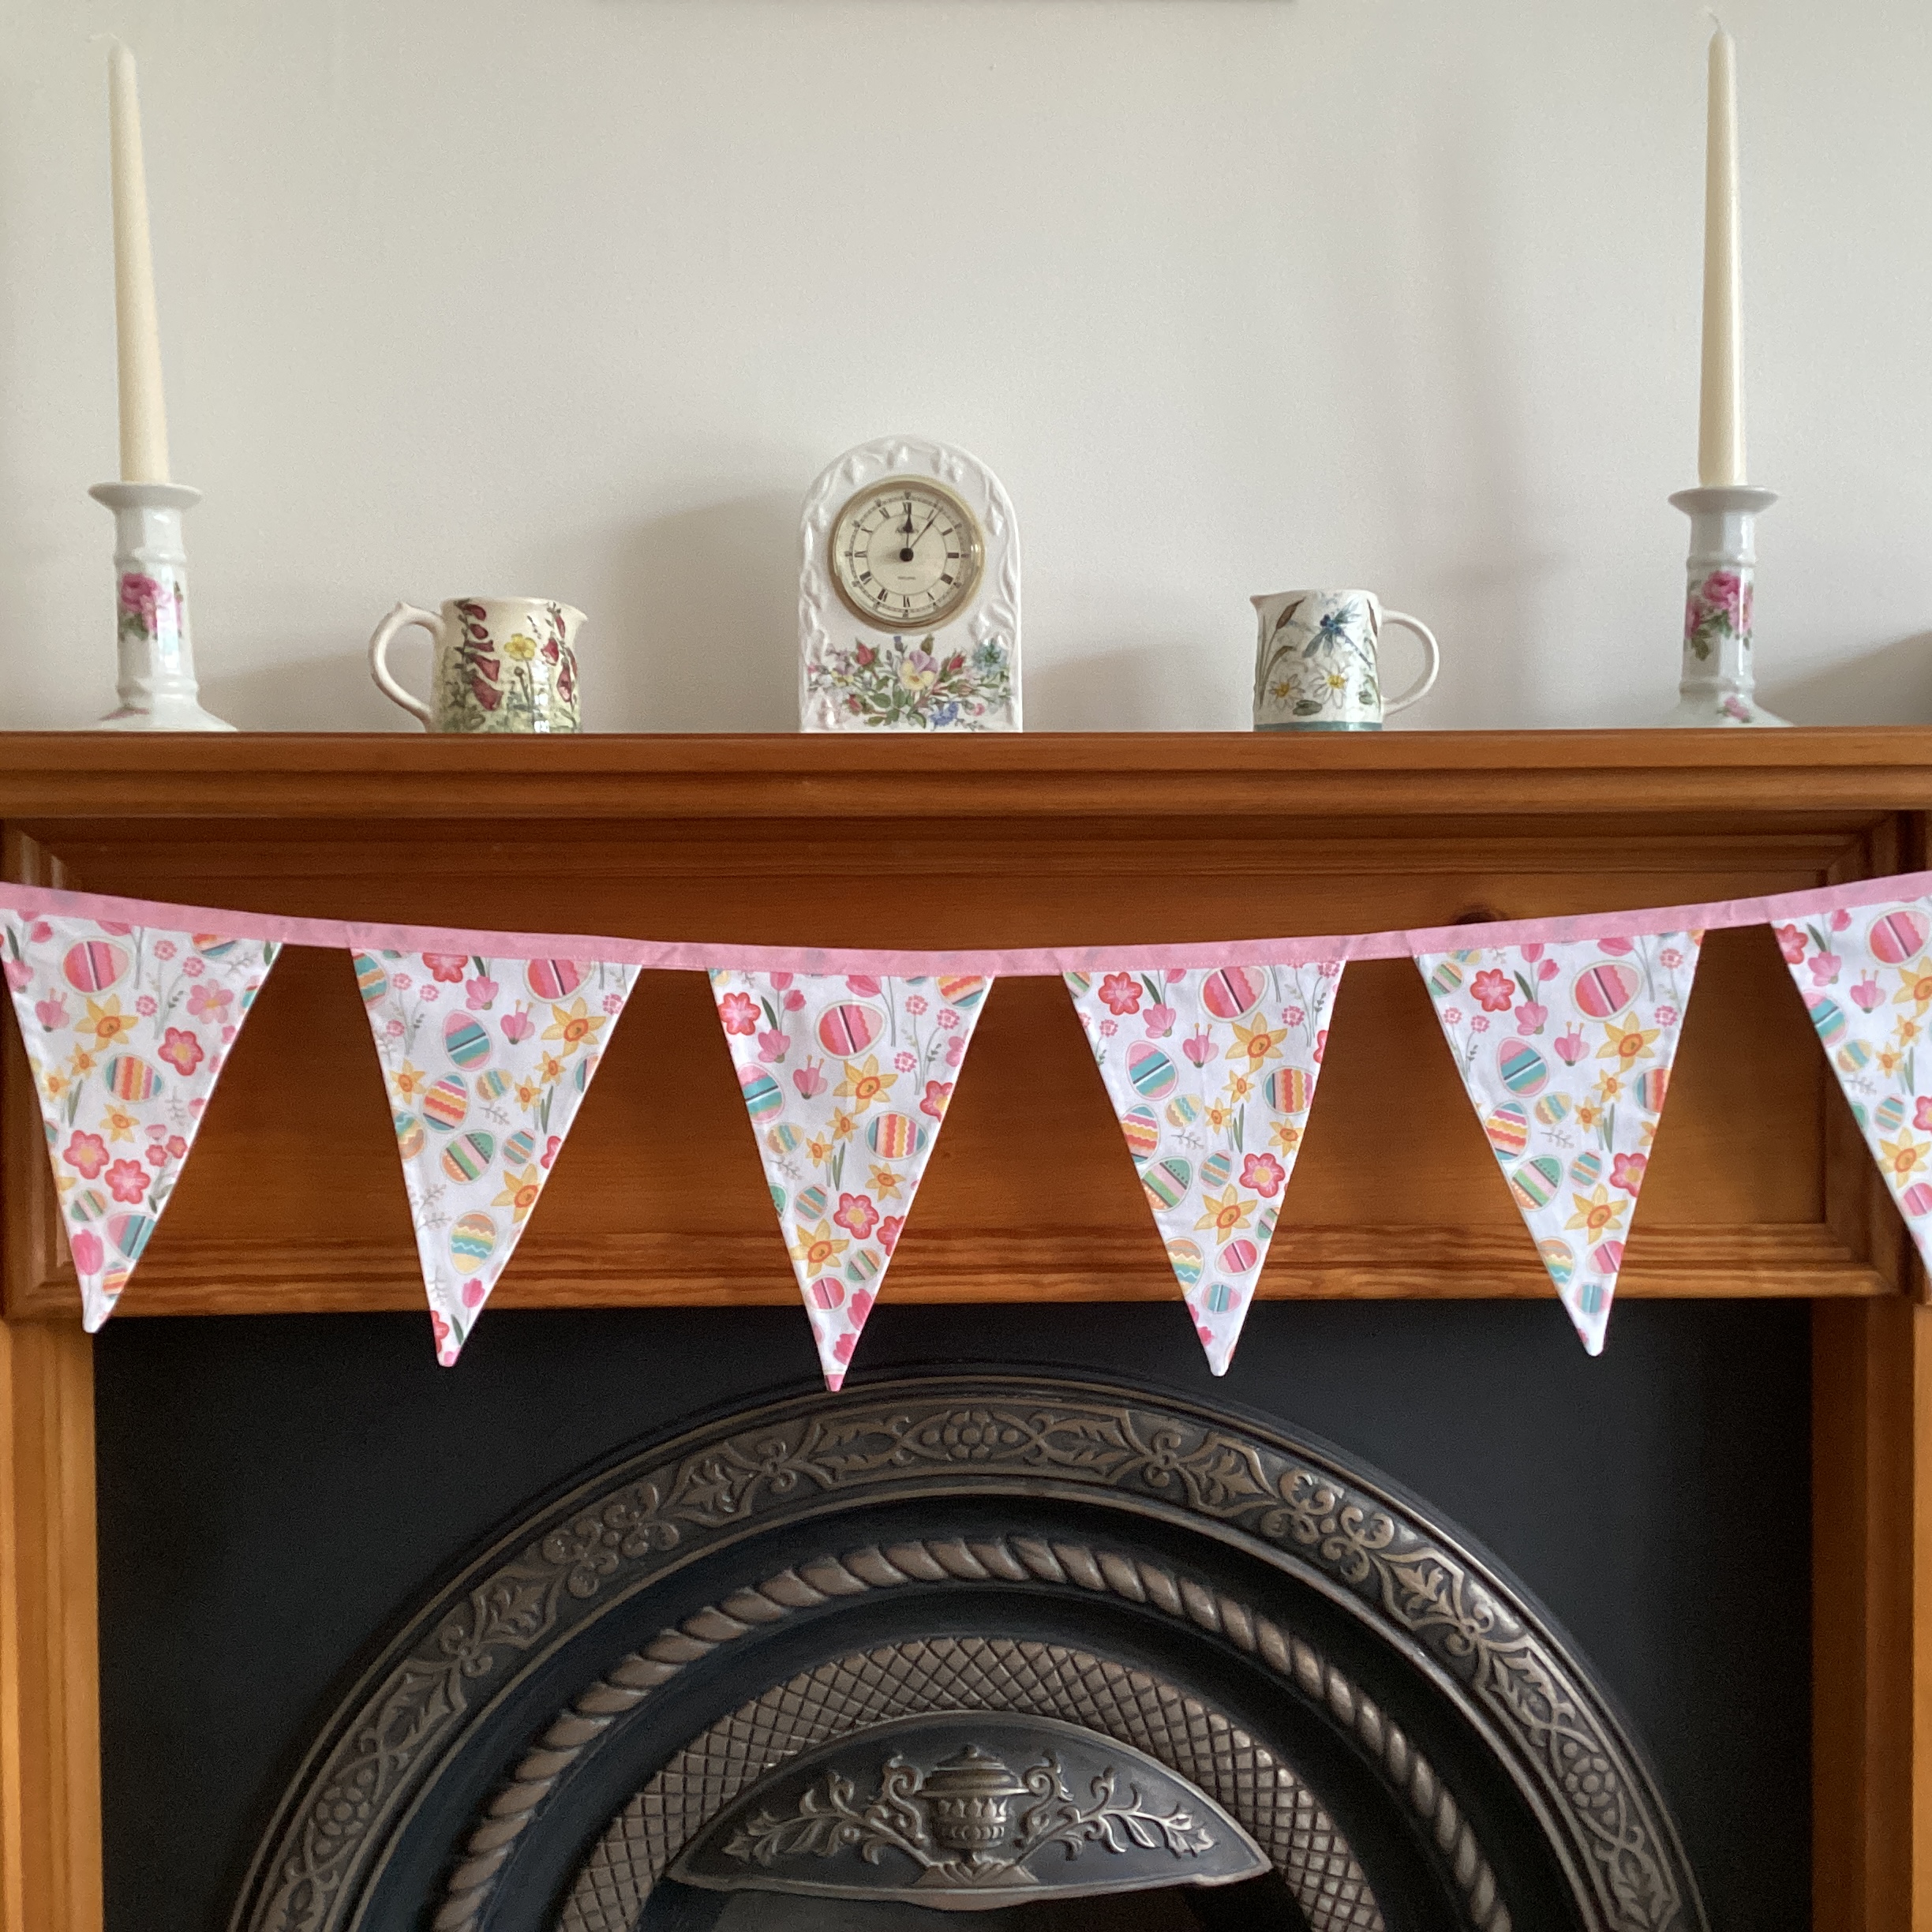 Bunting - Easter eggs